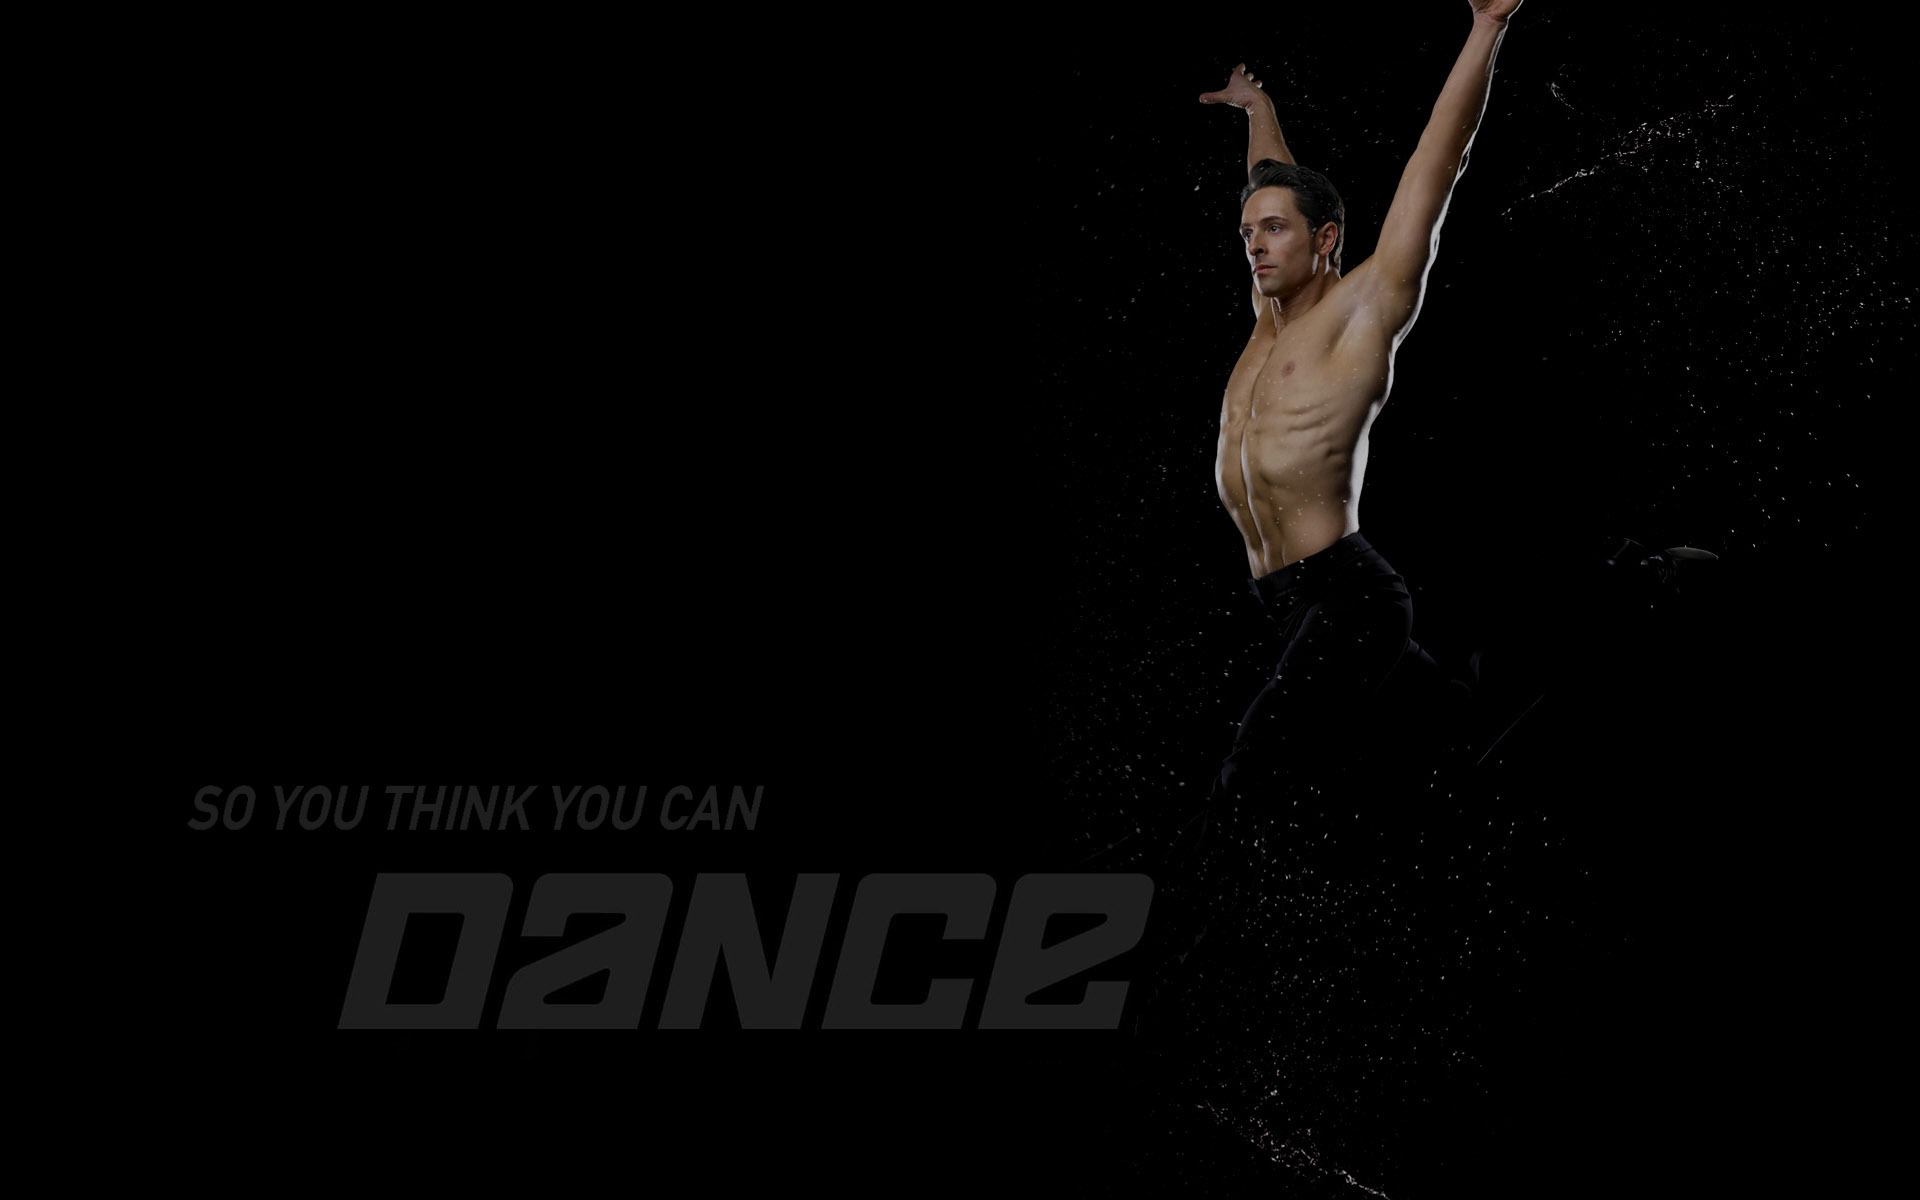 So You Think You Can Dance 舞林爭霸壁紙(二) #10 - 1920x1200